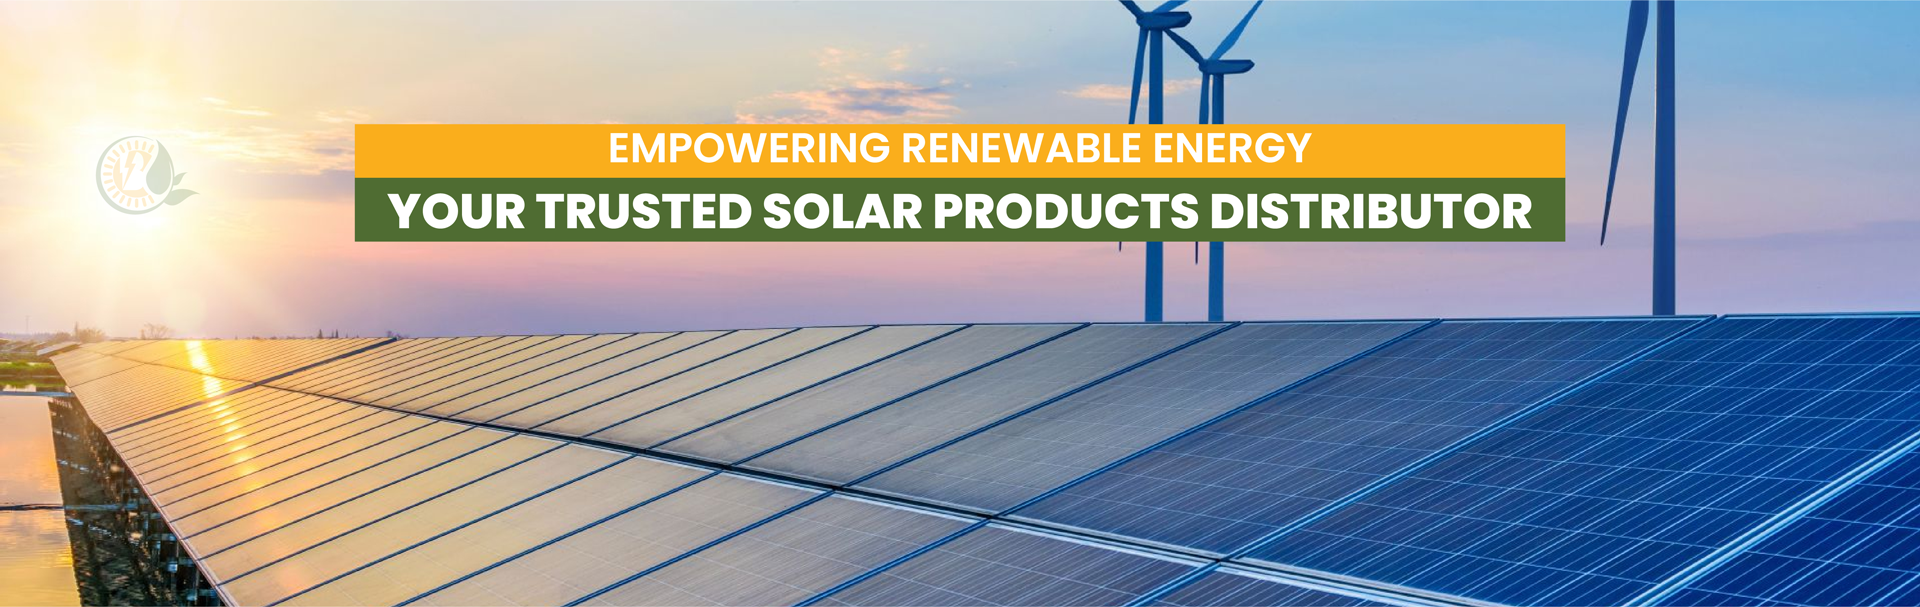 Empowering Renewable Energy: Your Trusted Solar Products Distributor